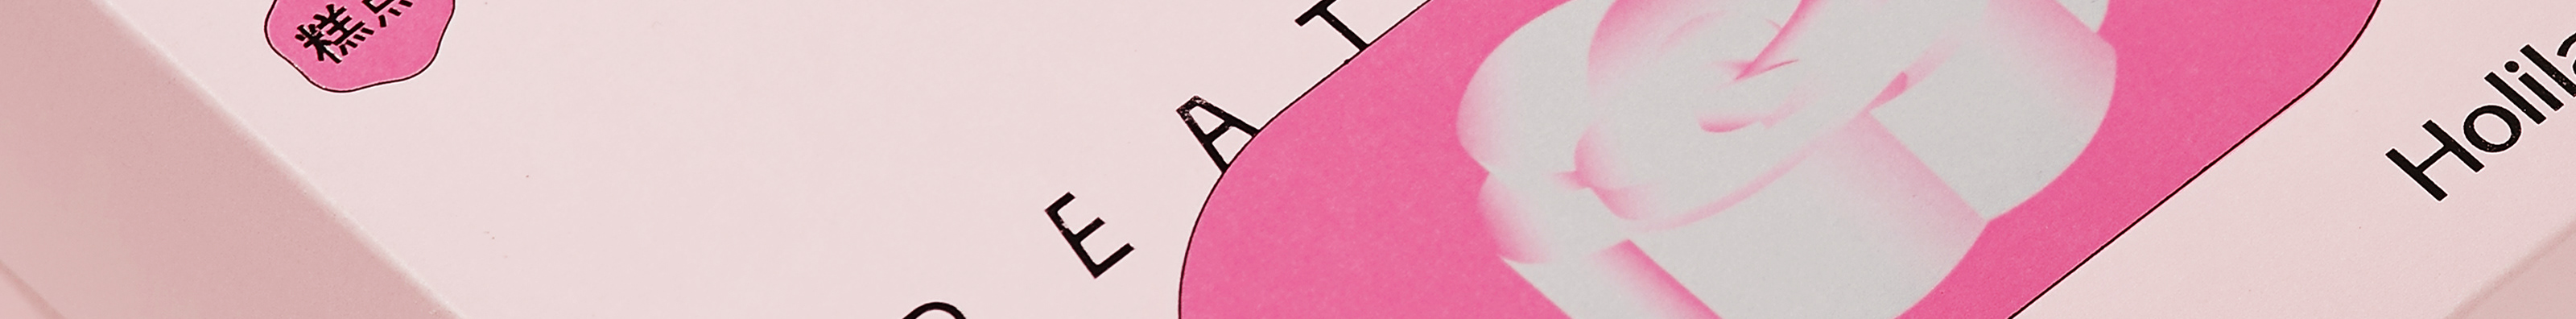 Dong _11's profile banner